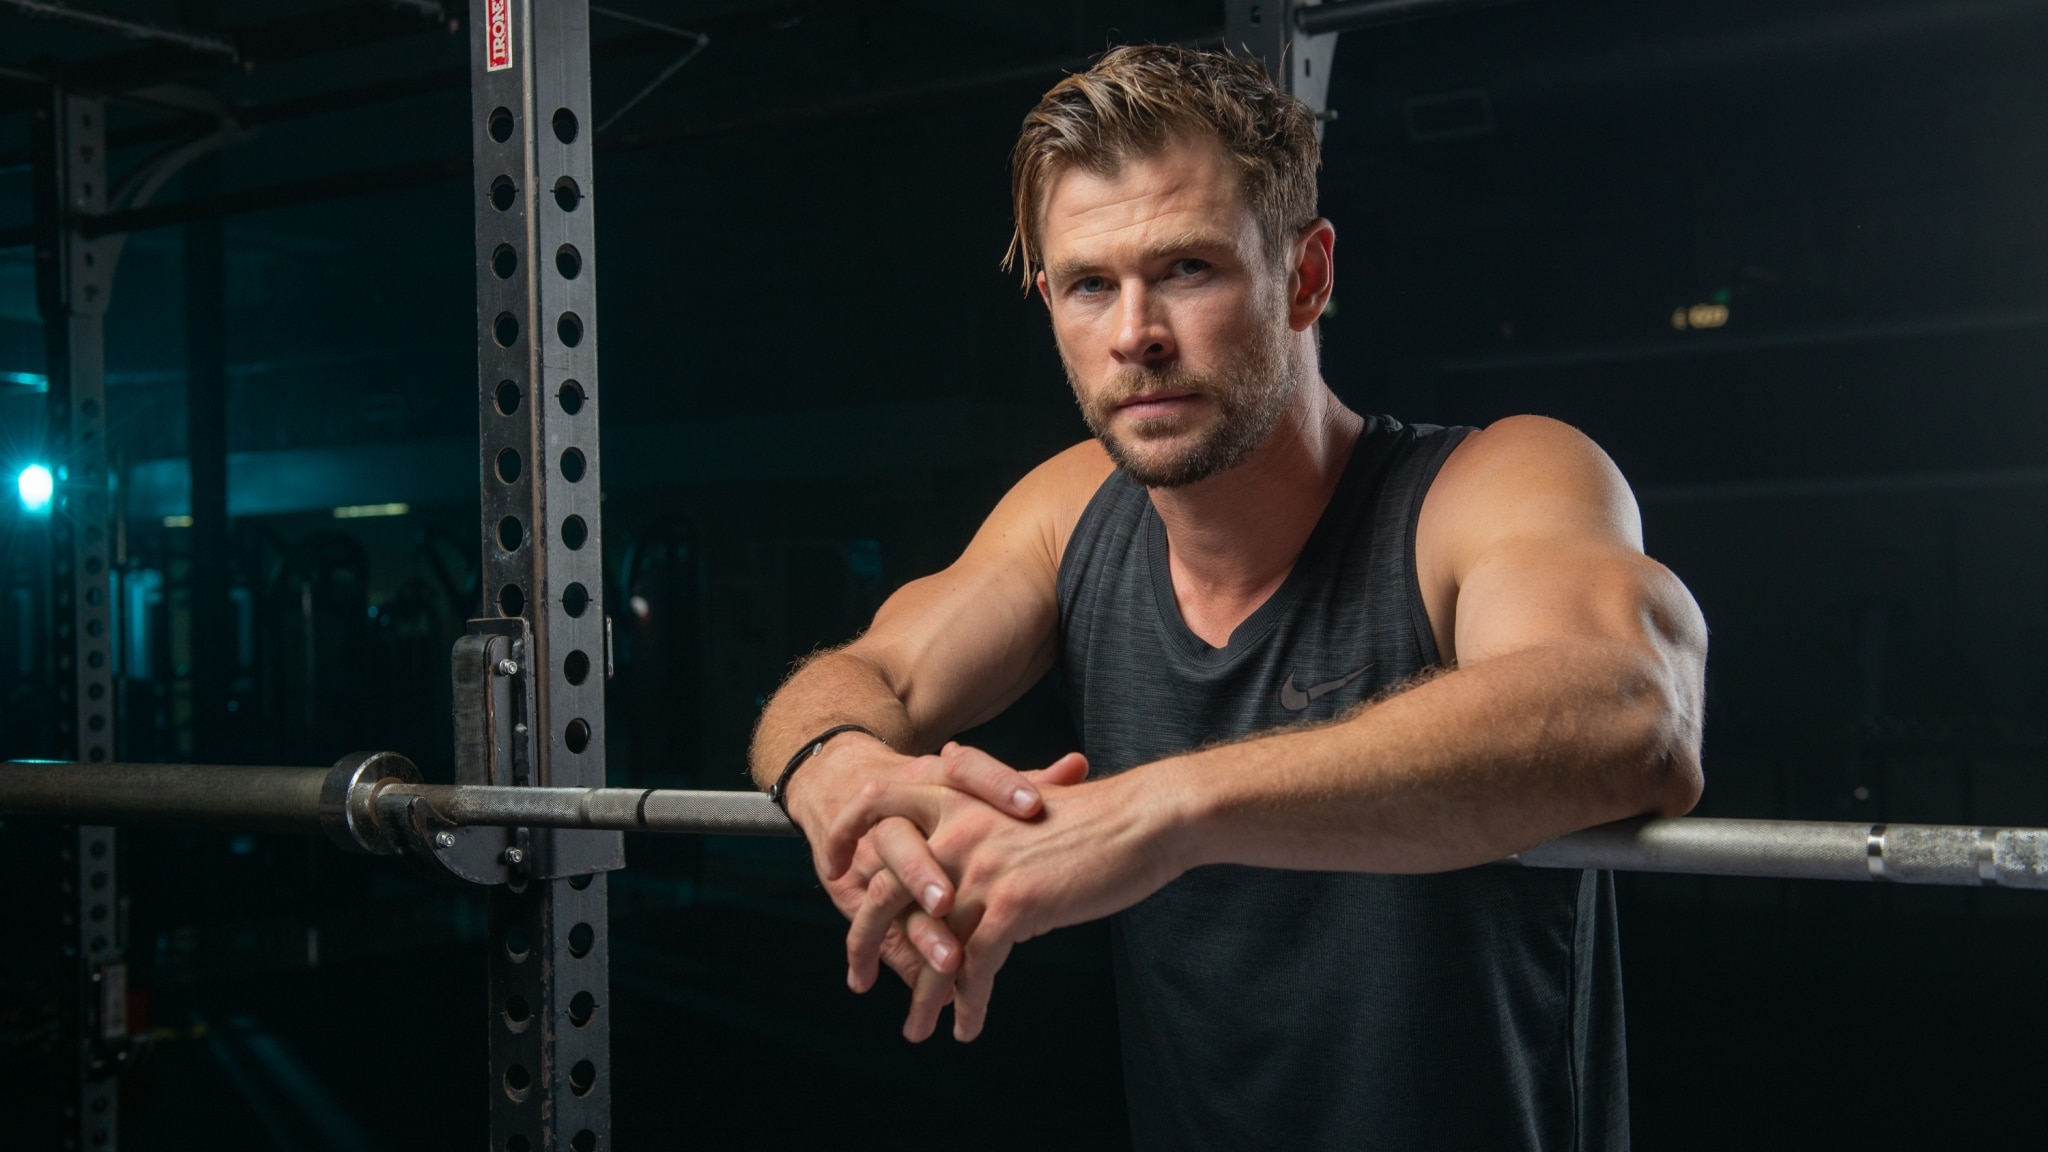 Chris Hemsworth Workout Photobook: A Book That True Fans Of Chris Hemsworth  Don't Want To Miss!